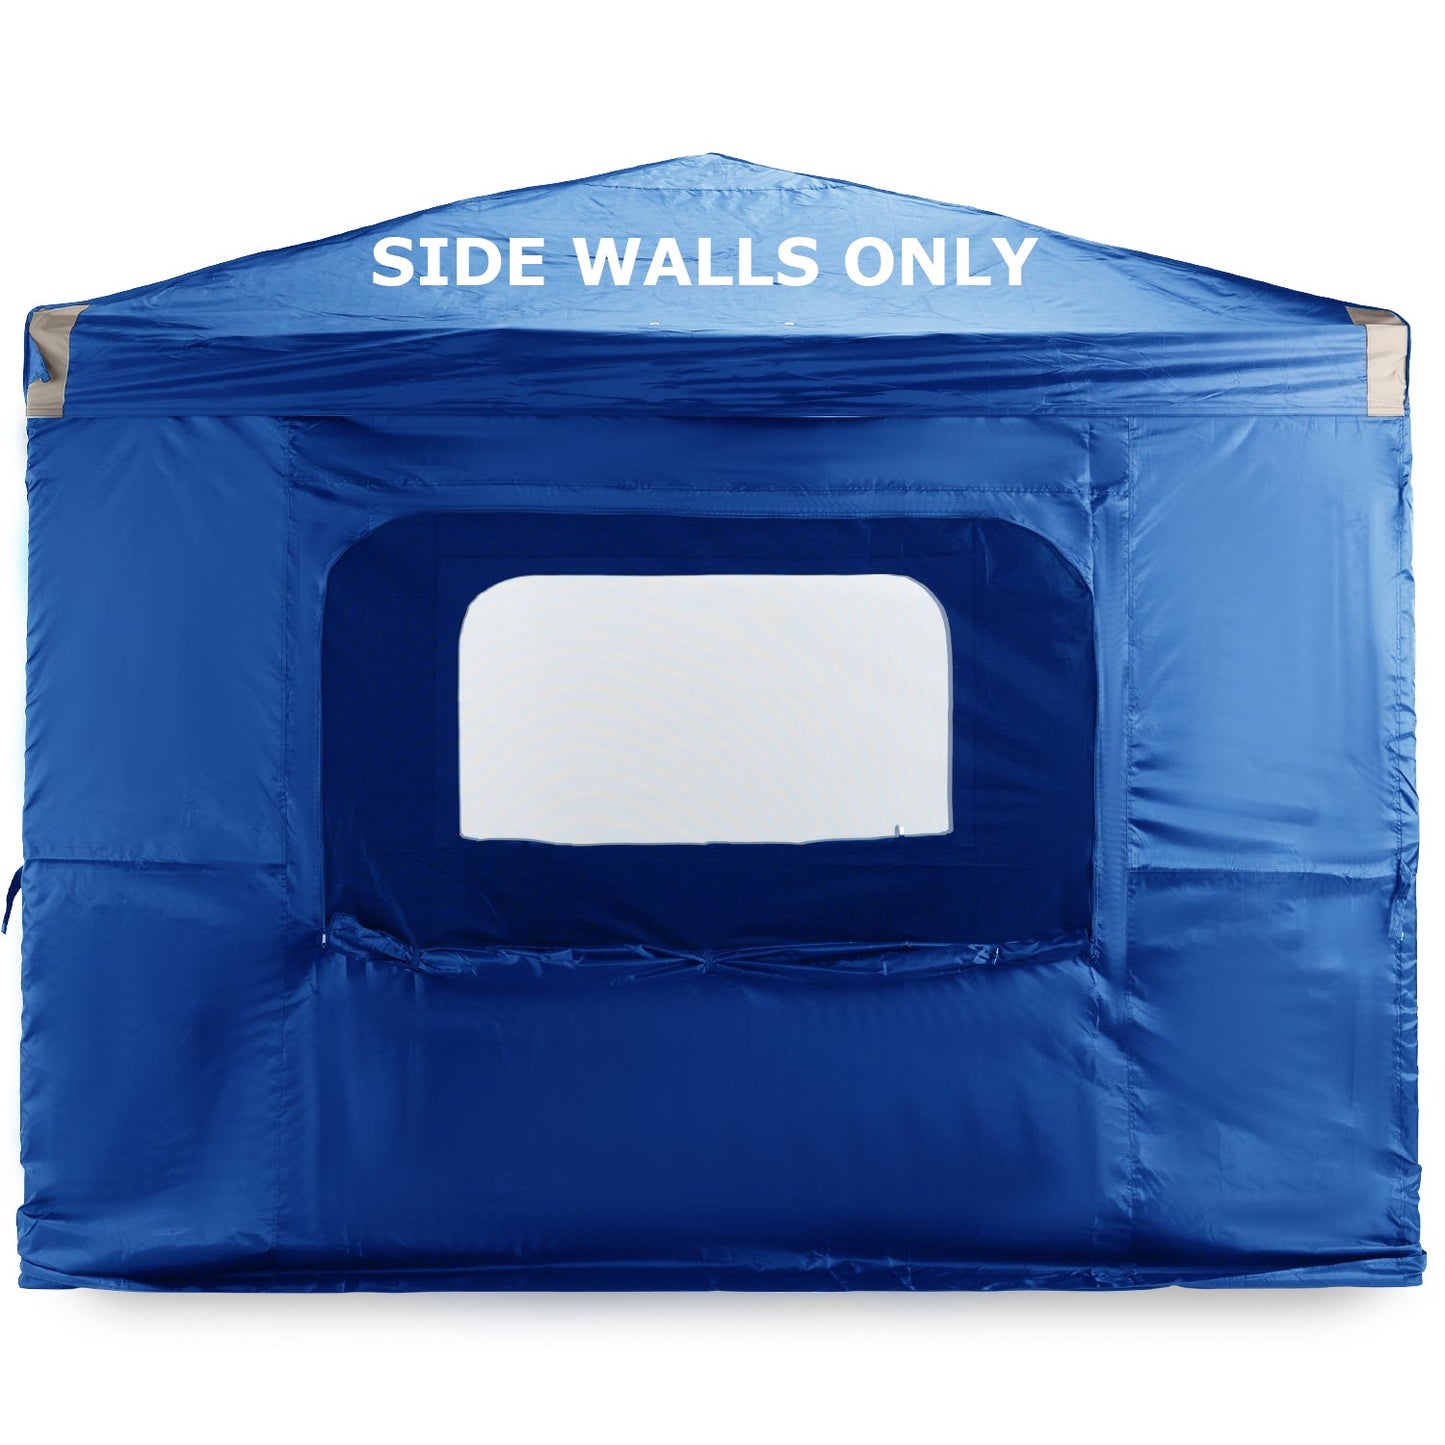 Canopy Sidewall Replacement with 2 Side Zipper and Windows for 10'' x 10'' Pop Up Canopy Tent  (Sidewall Only) Gazebo part Aoodor LLC Blue  